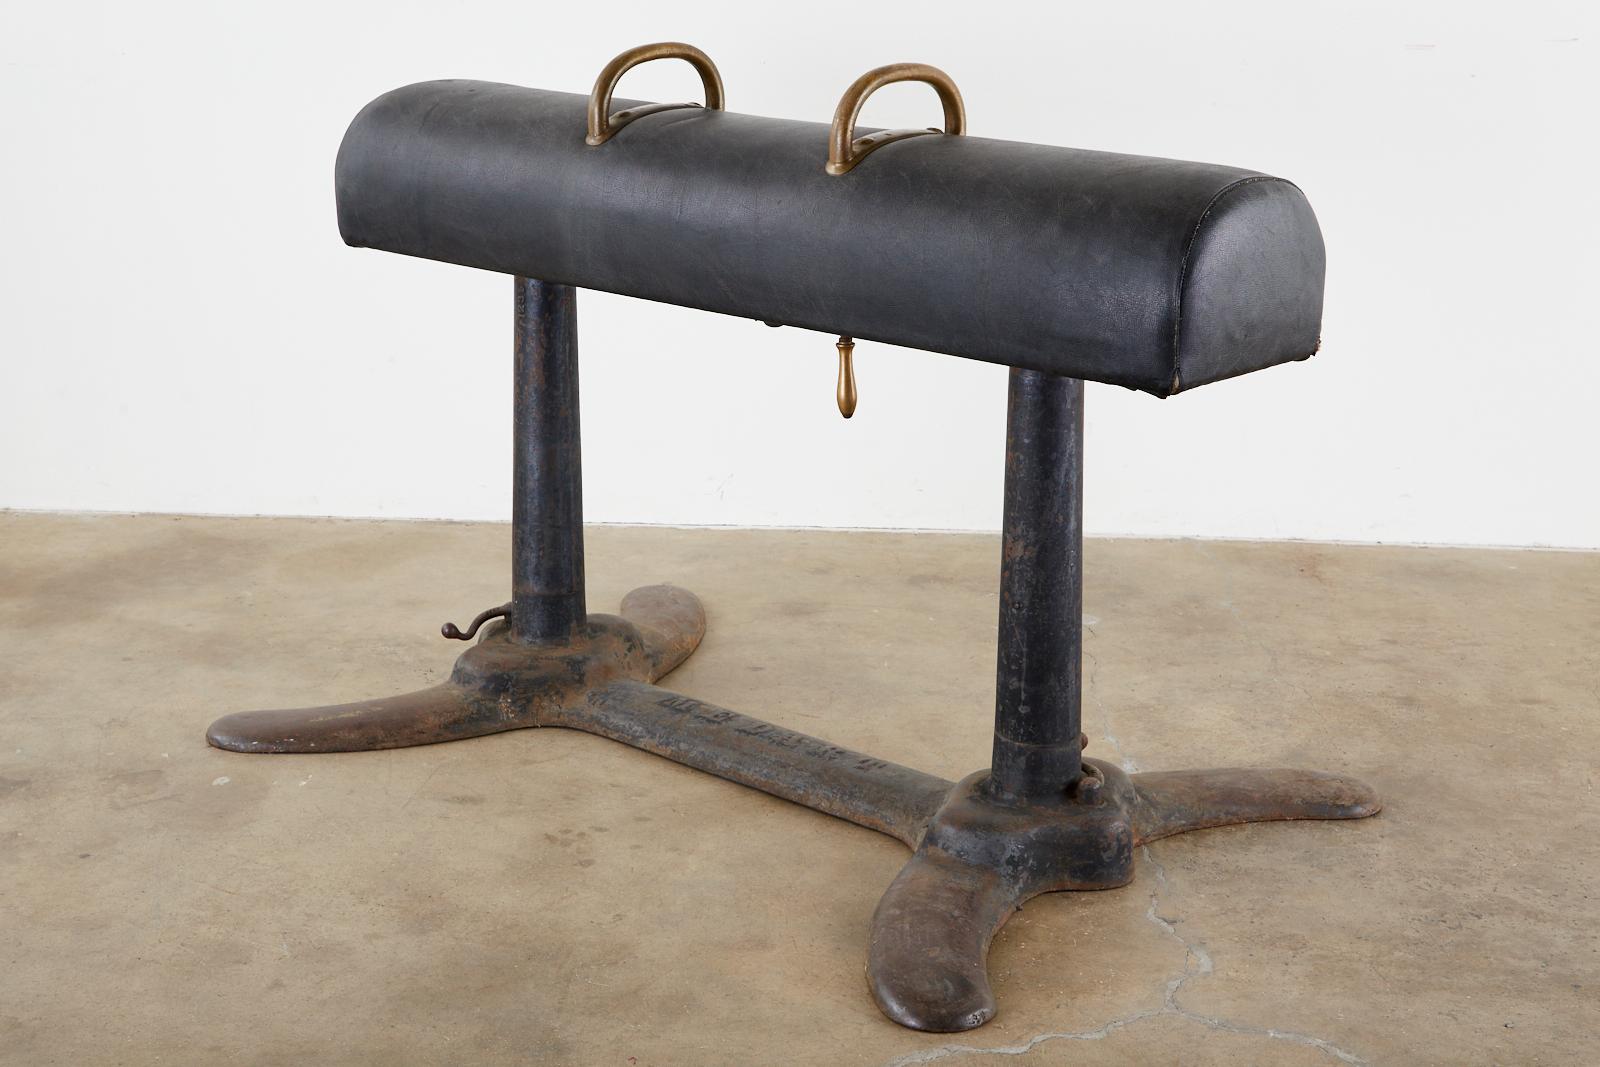 Rare early 20th century industrial style pommel horse made by Medart manufacturing company of St. Louis, Missouri. Large cast iron frame with adjustable features for use in a gymnasium. The body is covered with a Naugahyde leatherette and topped